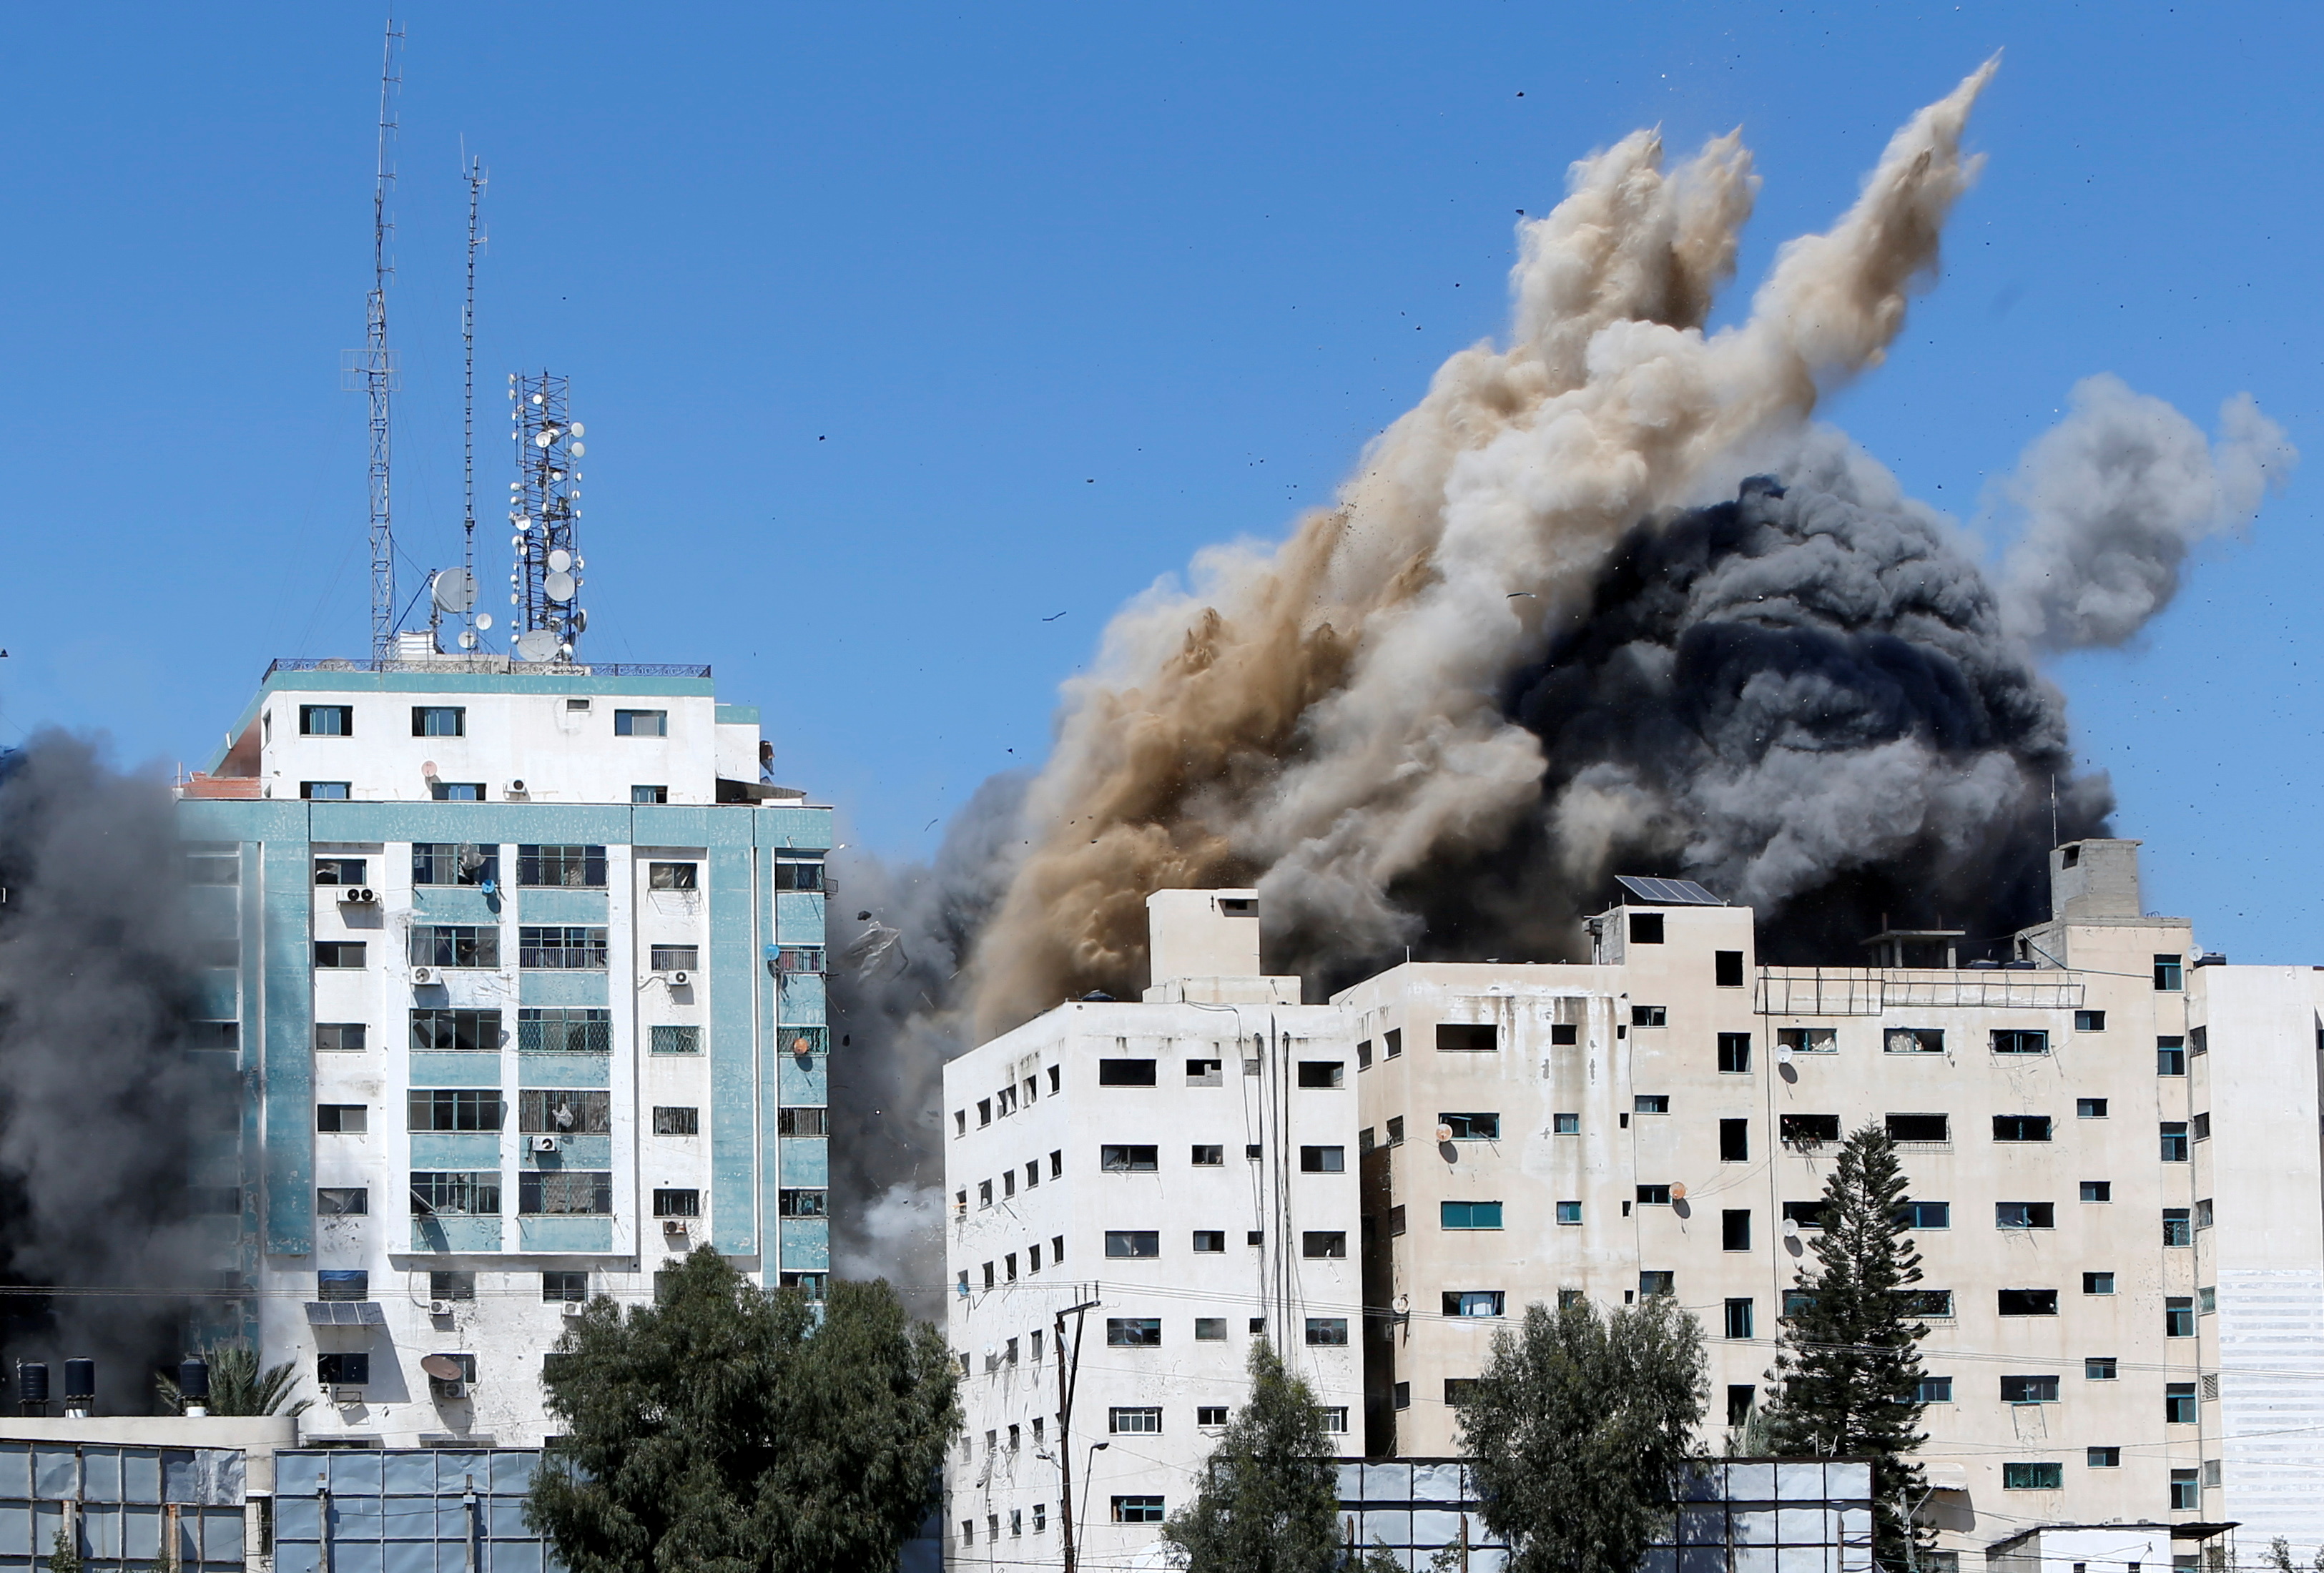 A tower housing AP, Al Jazeera offices collapses after Israeli missile strikes in Gaza city, May 15, 2021. REUTERS/Mohammed Salem